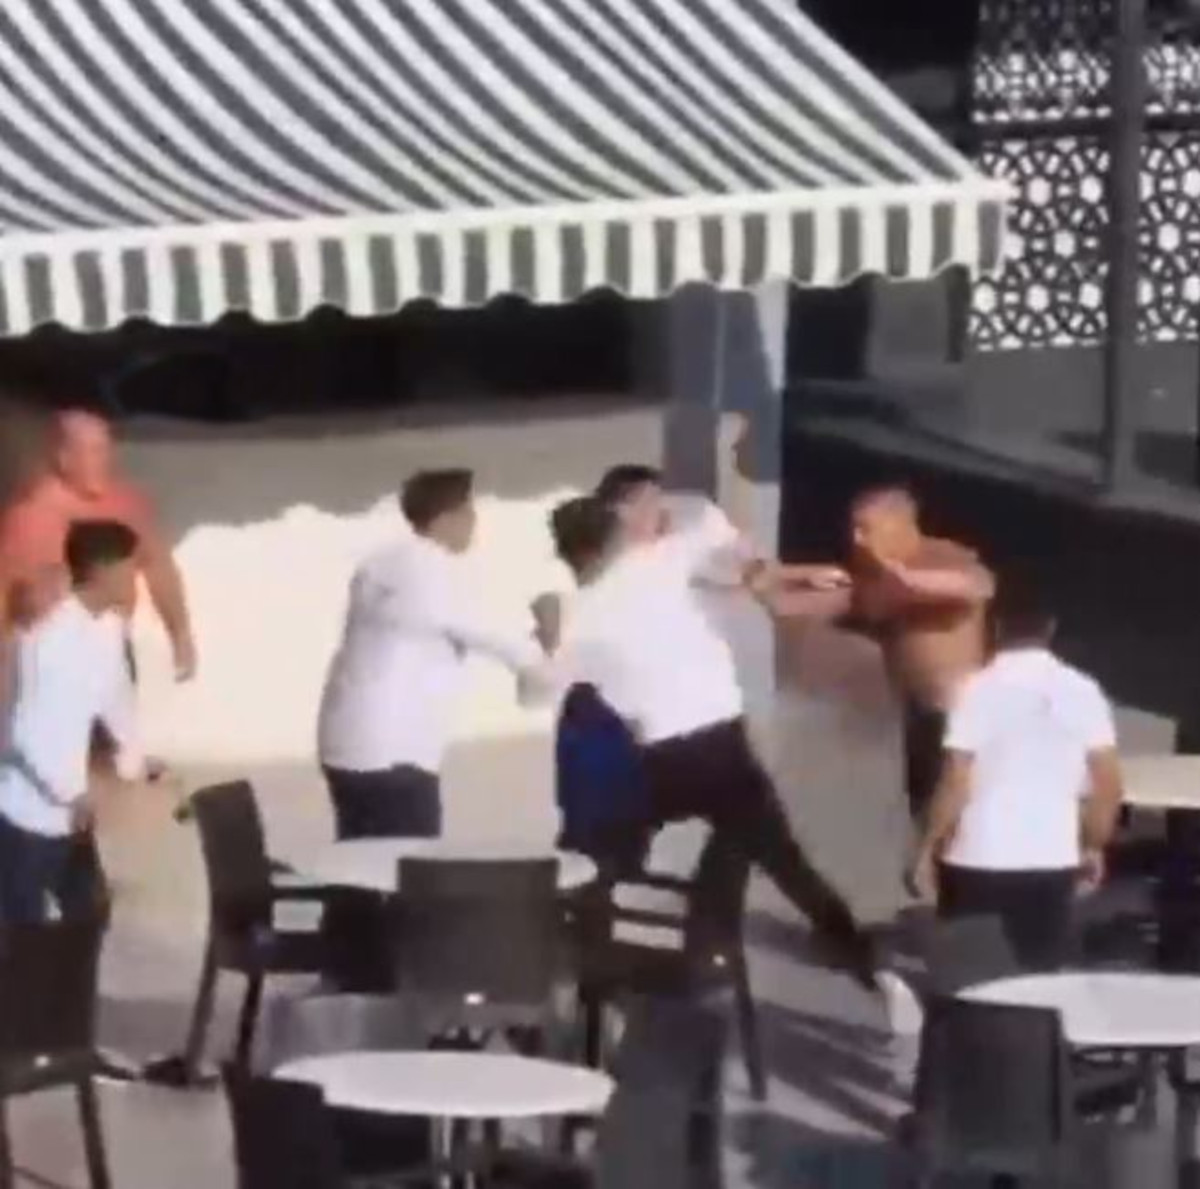 Some of the alleged staff landing punches on the man.